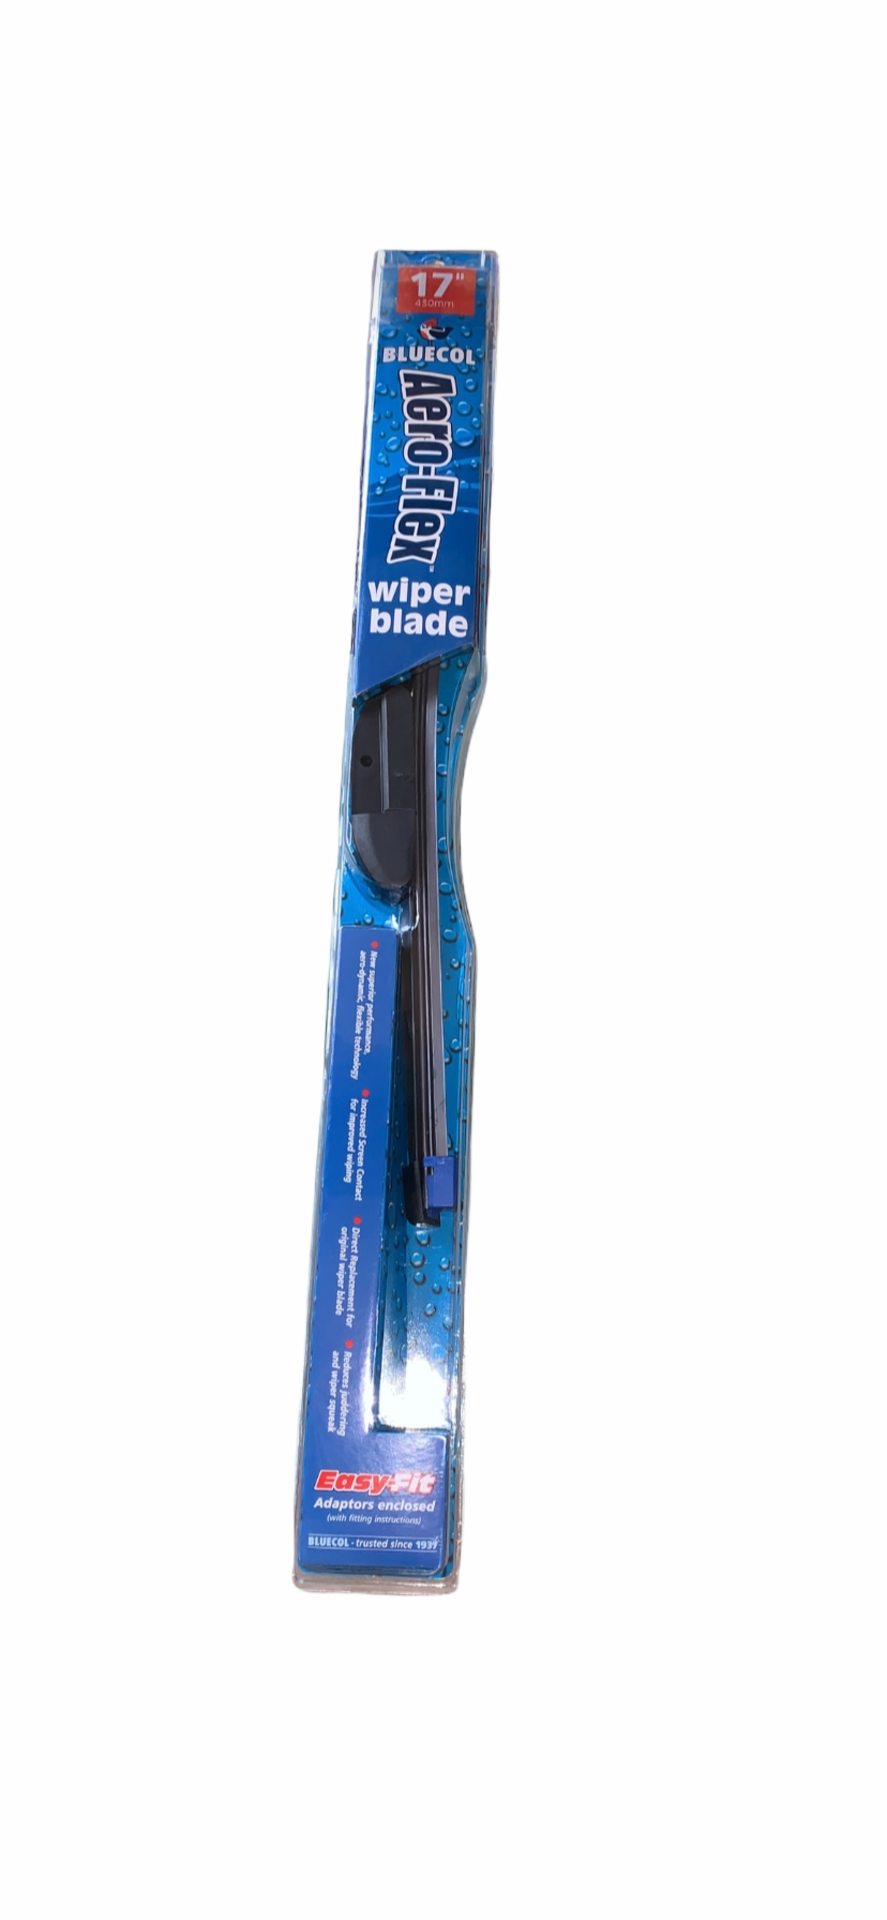 80 X BRAND NEW WIPER BLADES (STYLES AND SIZES MAY VARY)